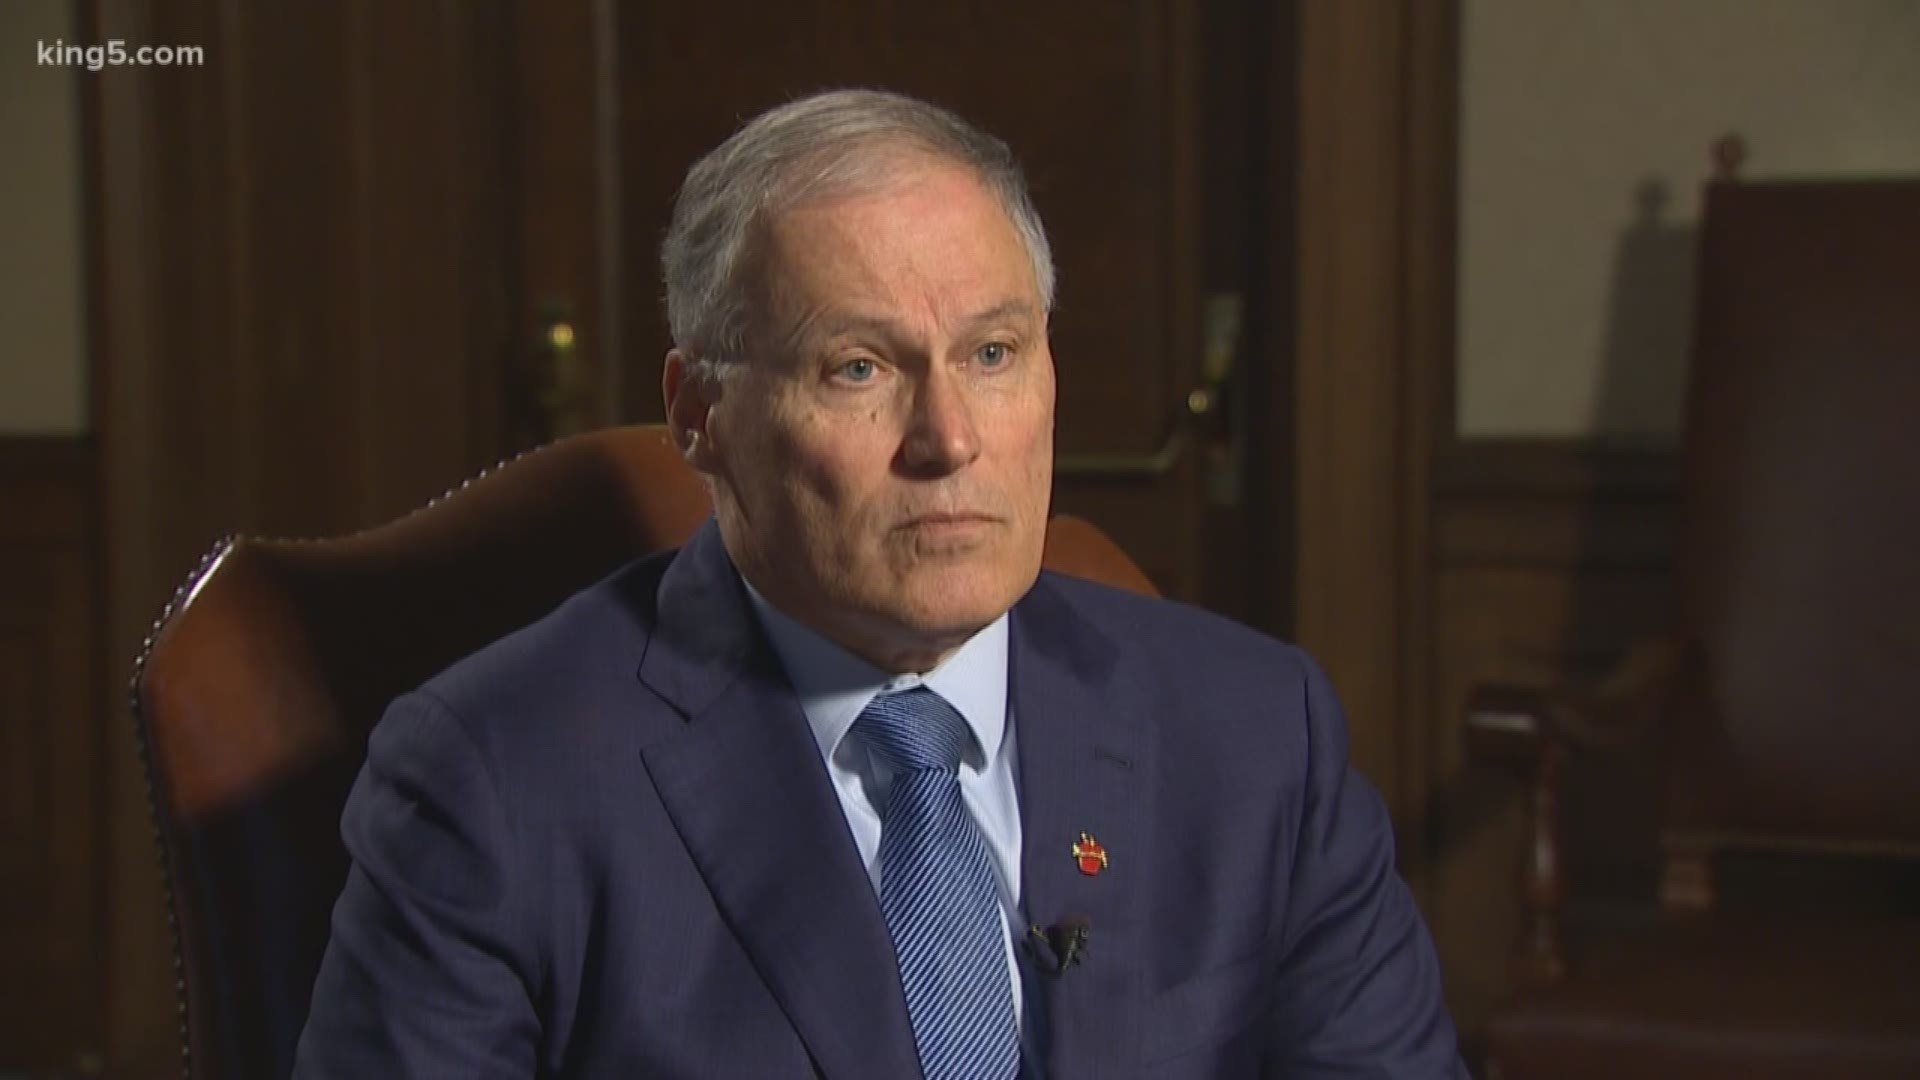 Washington Governor Jay Inslee said he intends on serving a third term if he is elected in November.